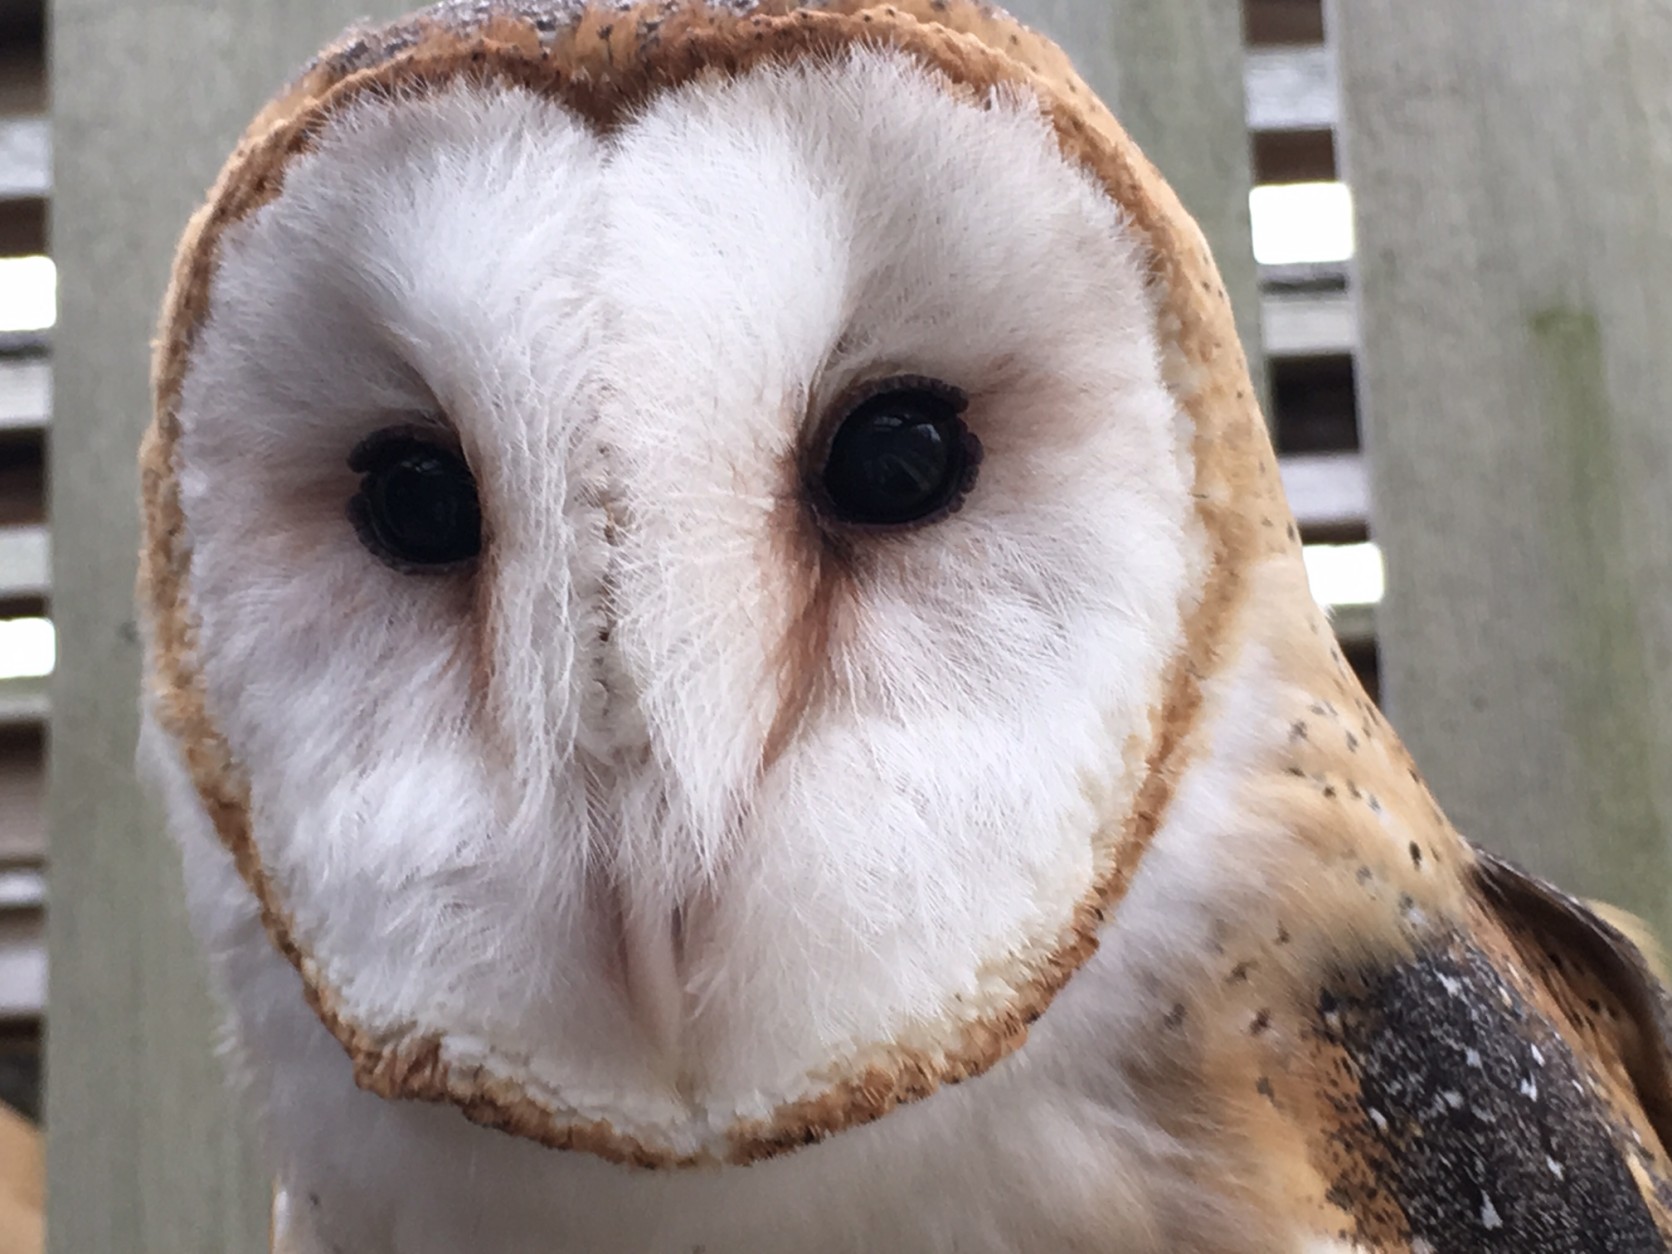 A barn owl at the Cunningham Falls State Park aviary. (WTOP/Kate Ryan)